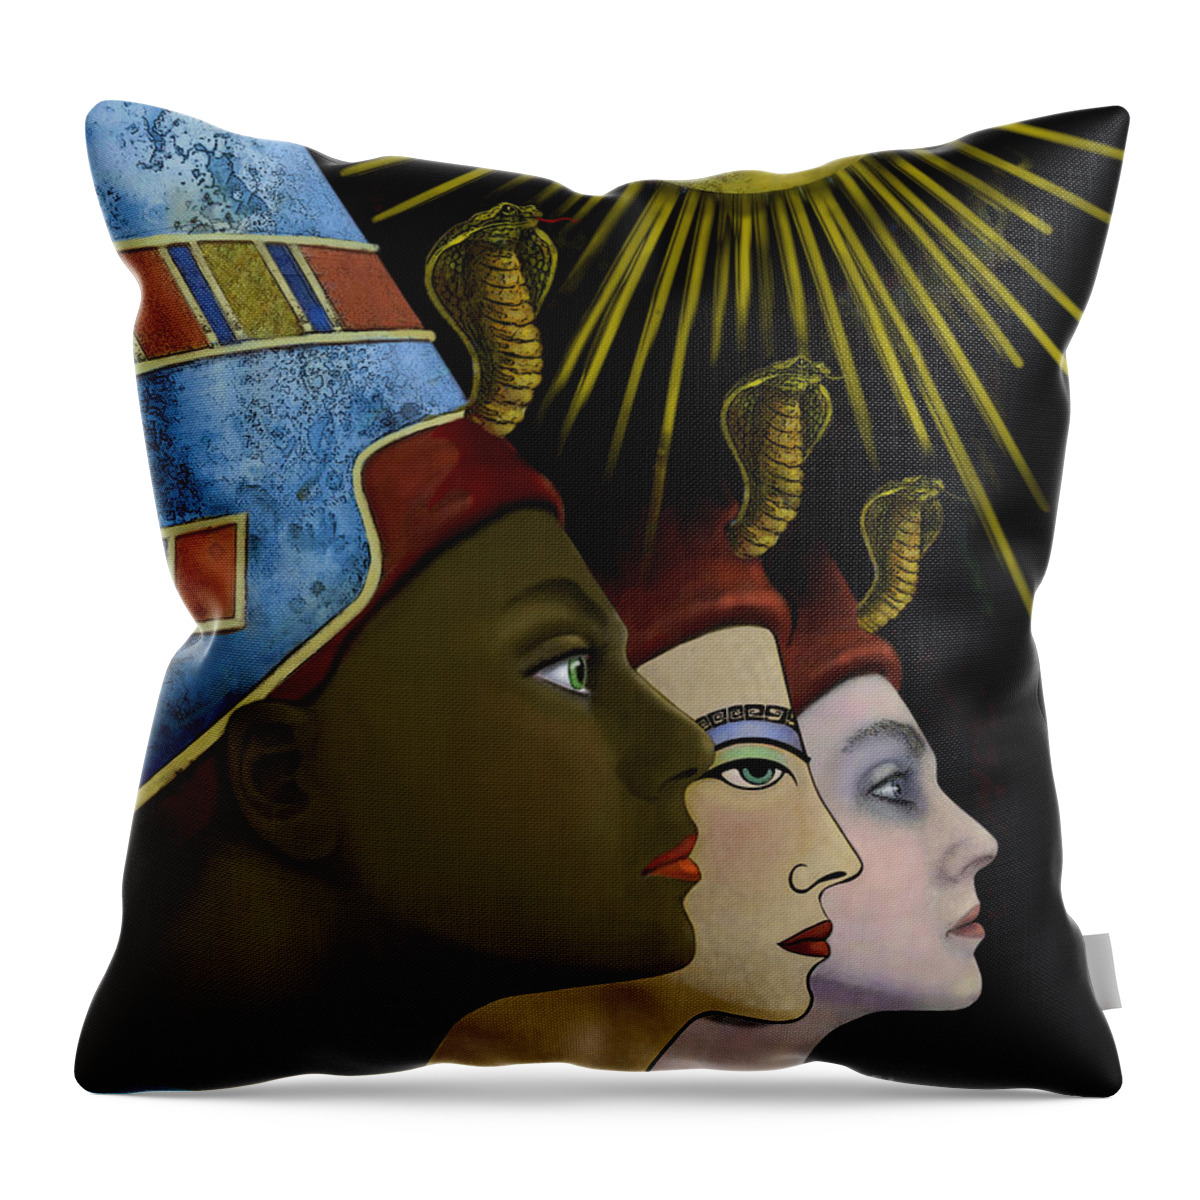 Aten Throw Pillow featuring the digital art My Name is Nefertiti. My Name by Carol Jacobs